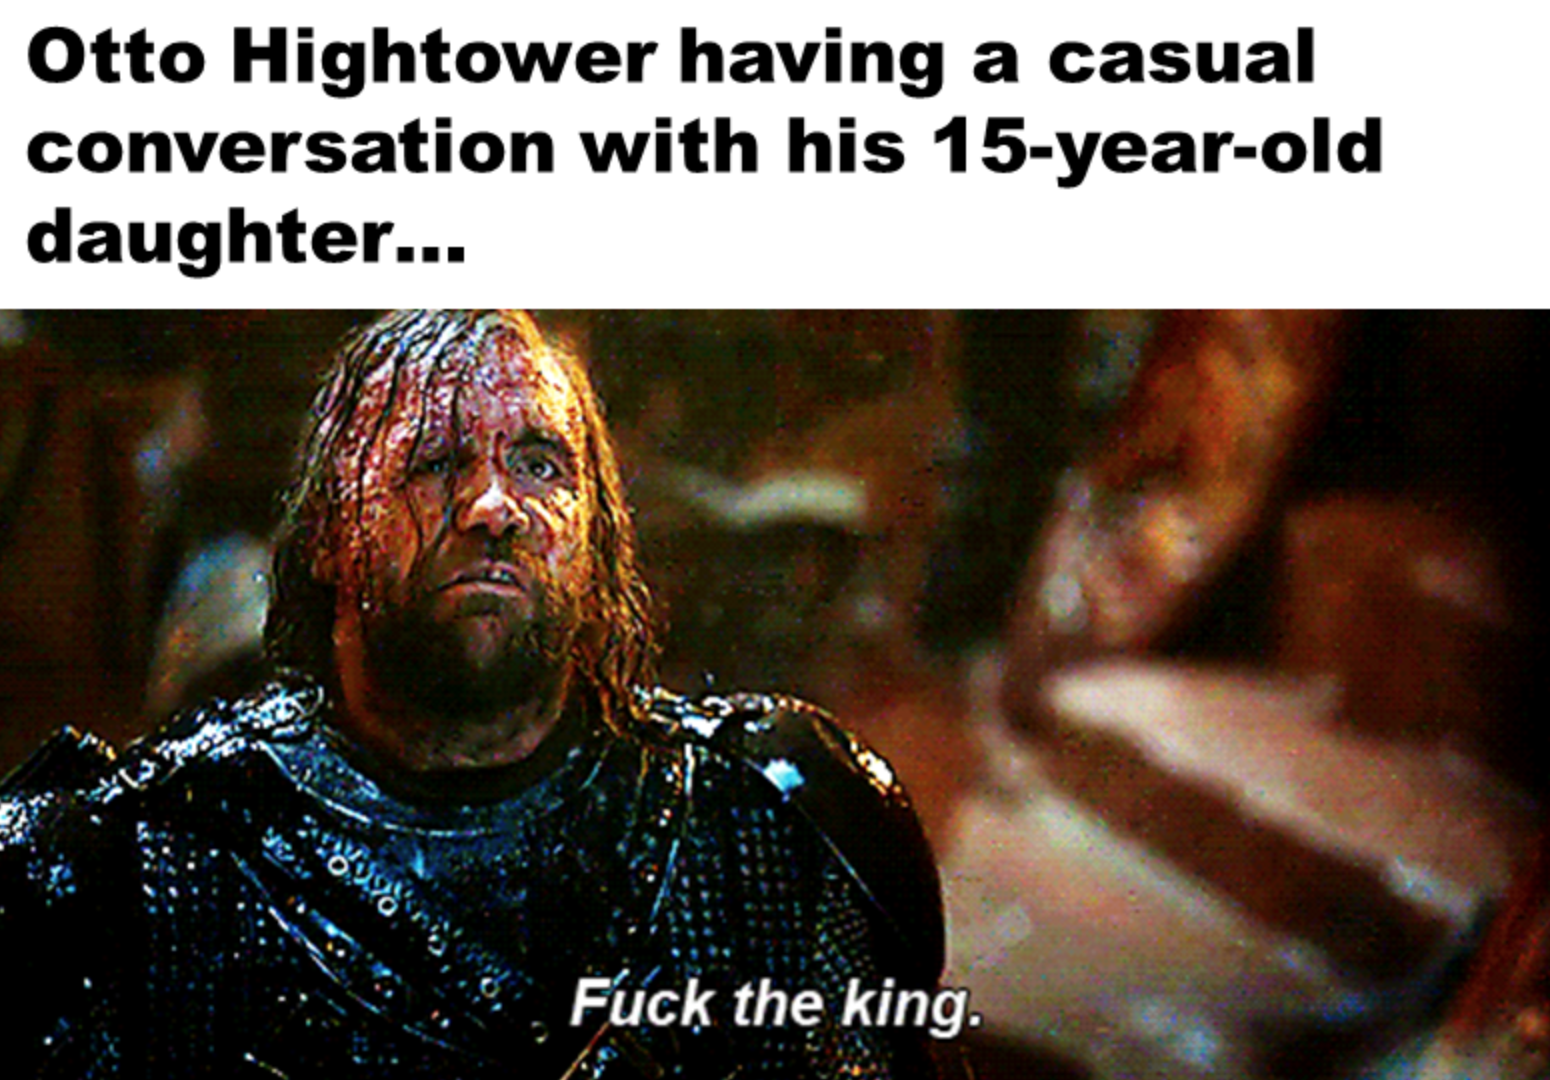 House of the Dragon Episode 2 memes - photo caption - Otto Hightower having a casual conversation with his 15yearold daughter... Fuck the king.